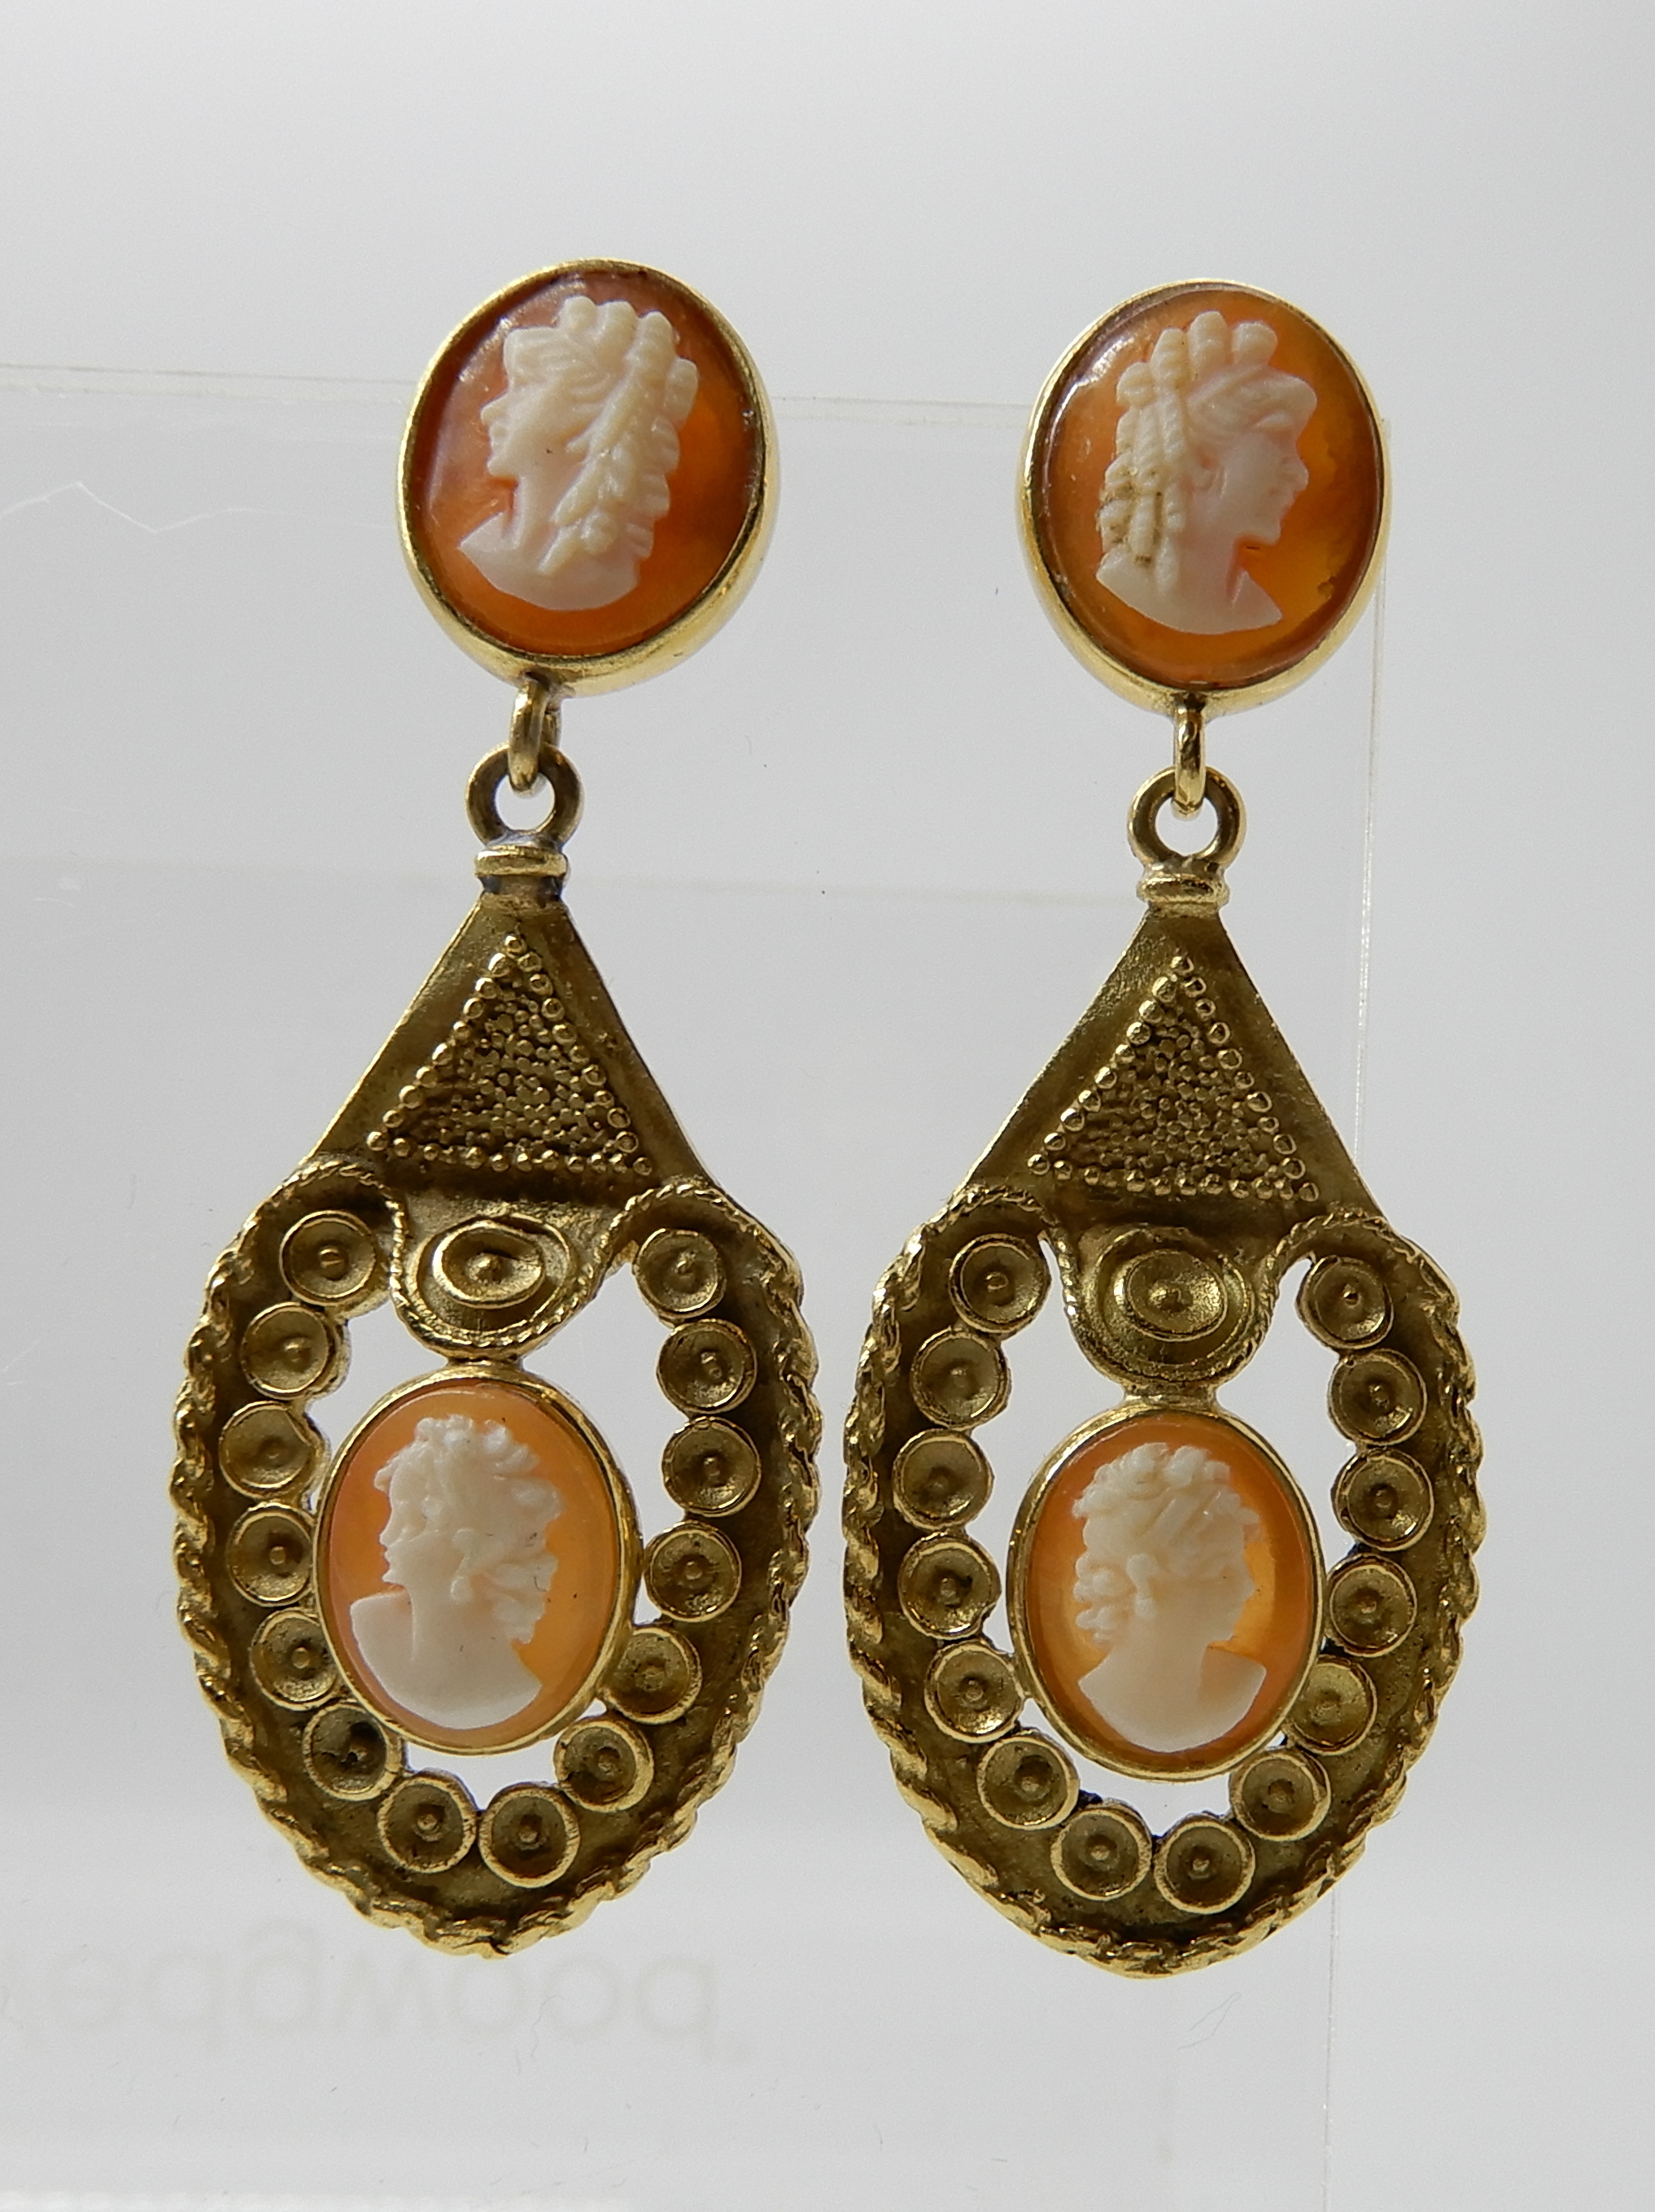 A PAIR OF 18CT GOLD CAMEO EARRINGS with decorative mounts, post and butterfly fitting. Stamped 750 - Image 2 of 4